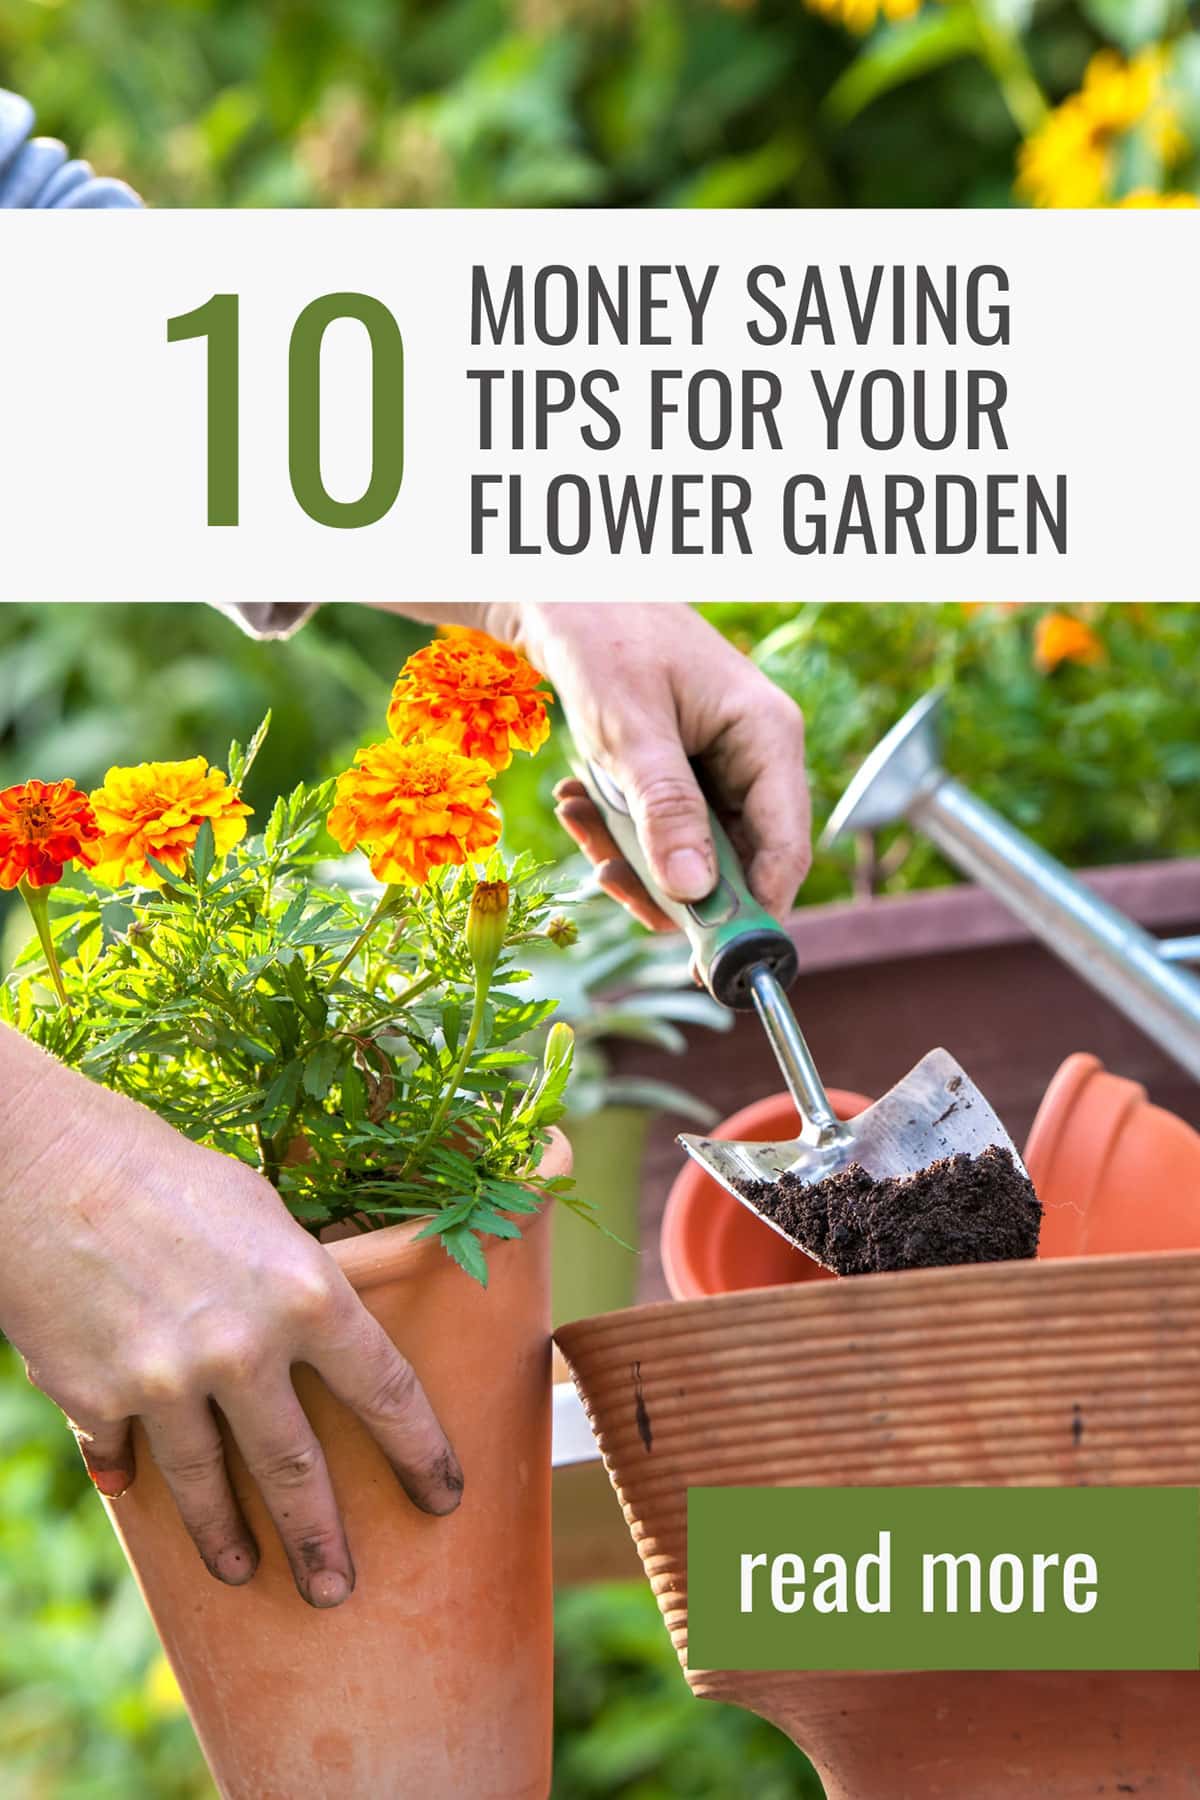 How to save money when planting your flower beds - image on woman potting up a marigold.